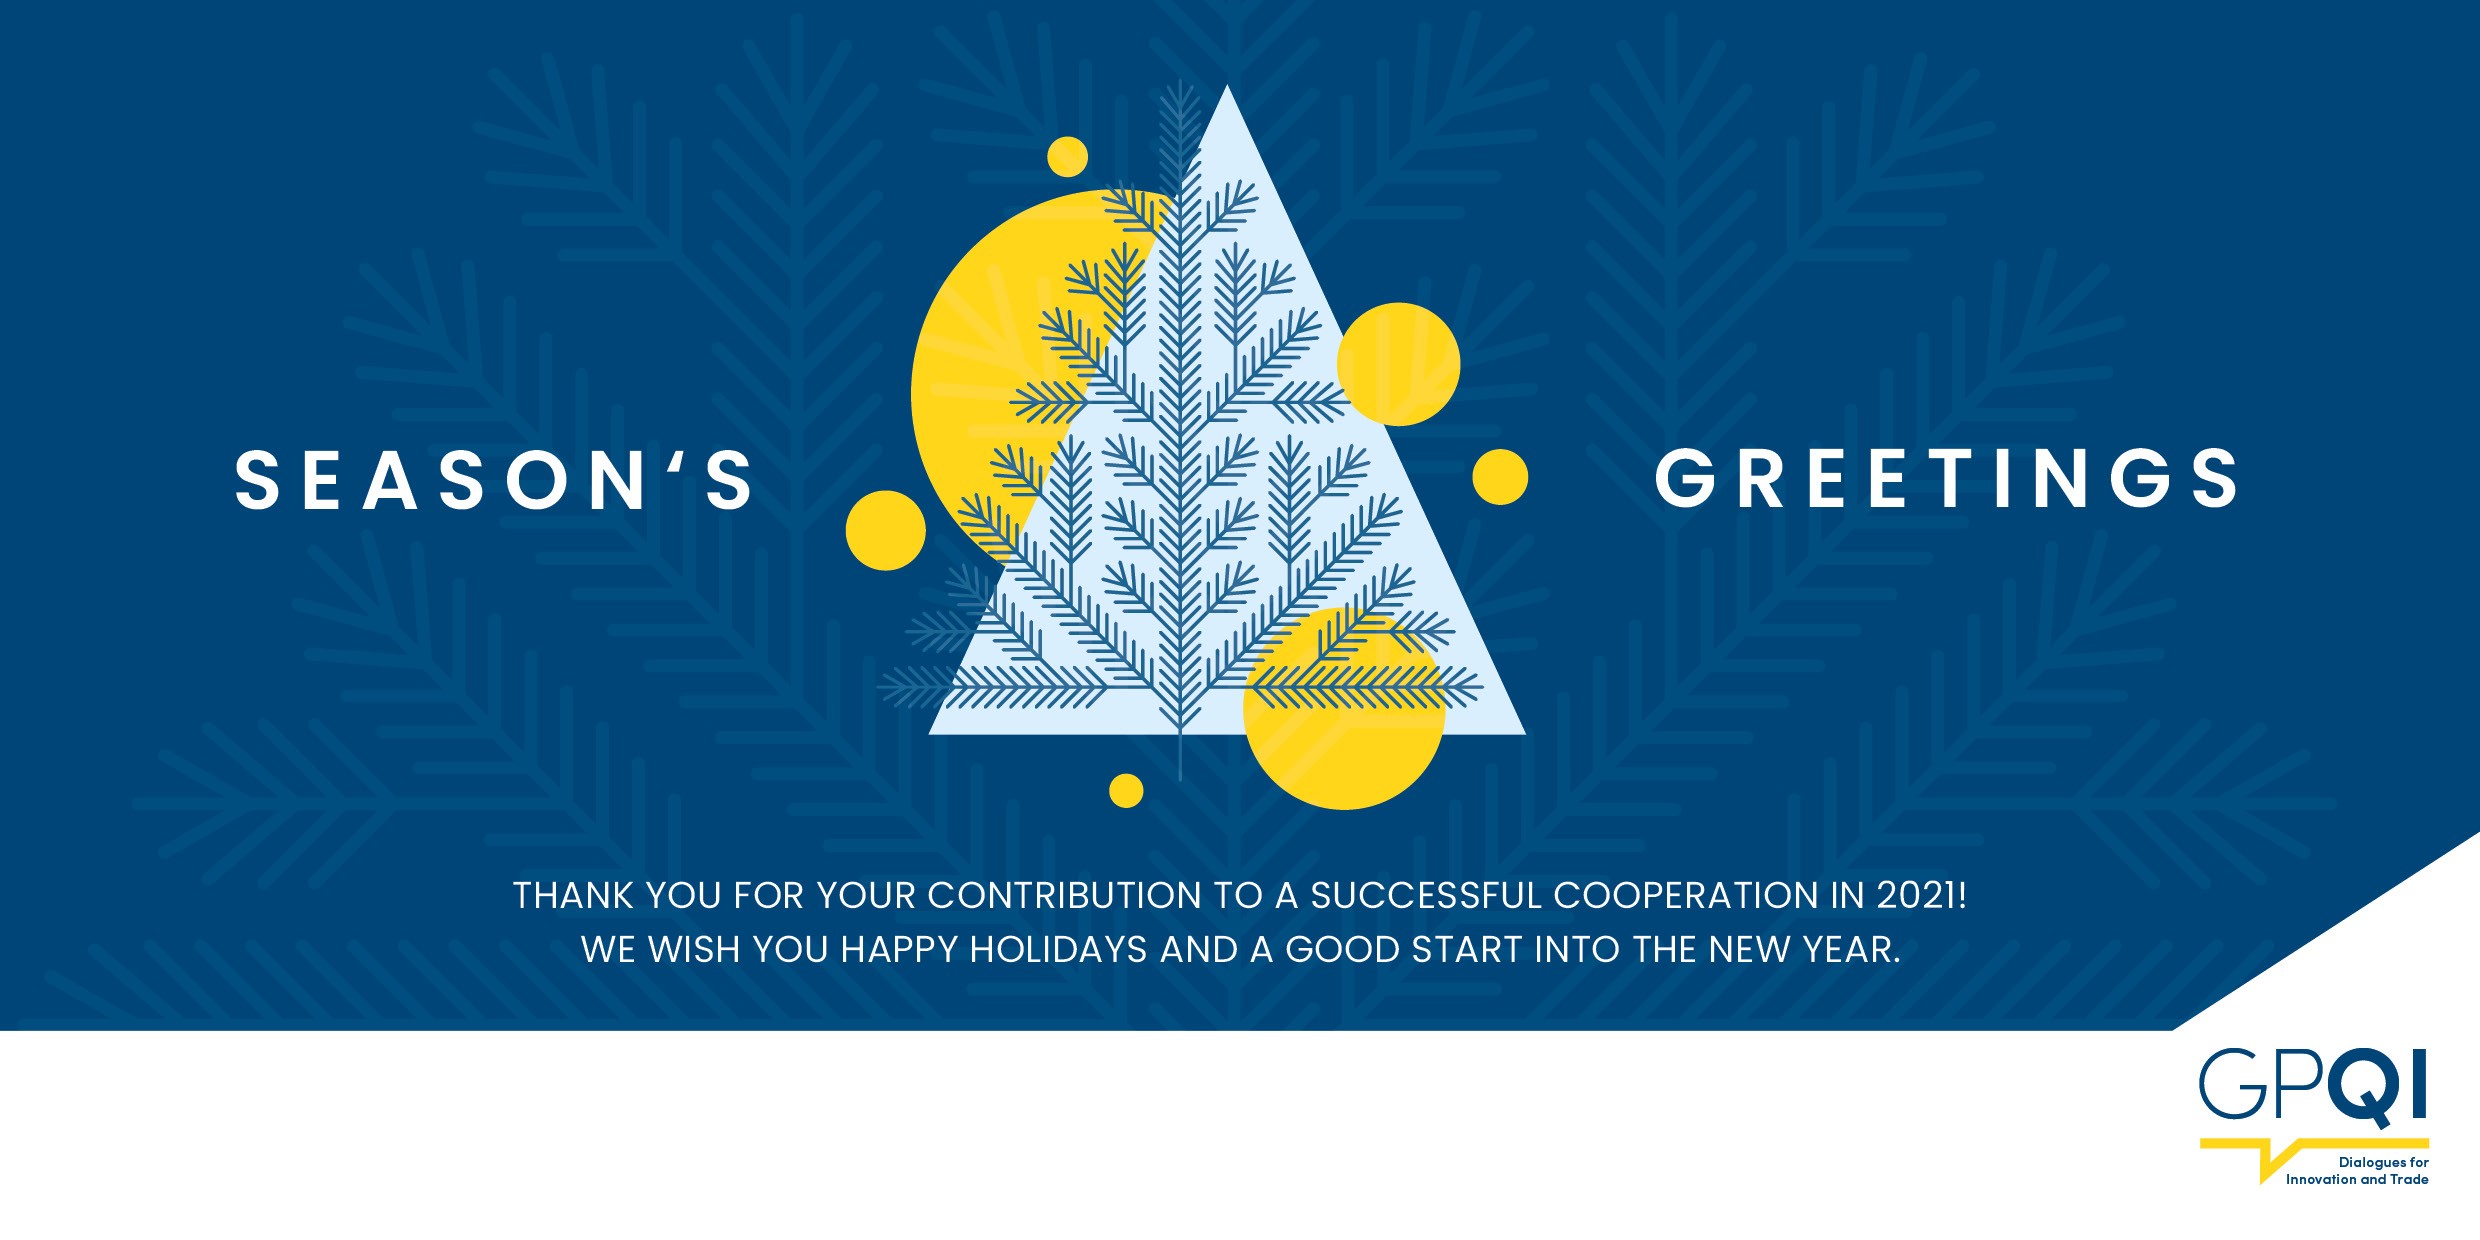 GPQI wishes you happy holidays and a healthy new year. 